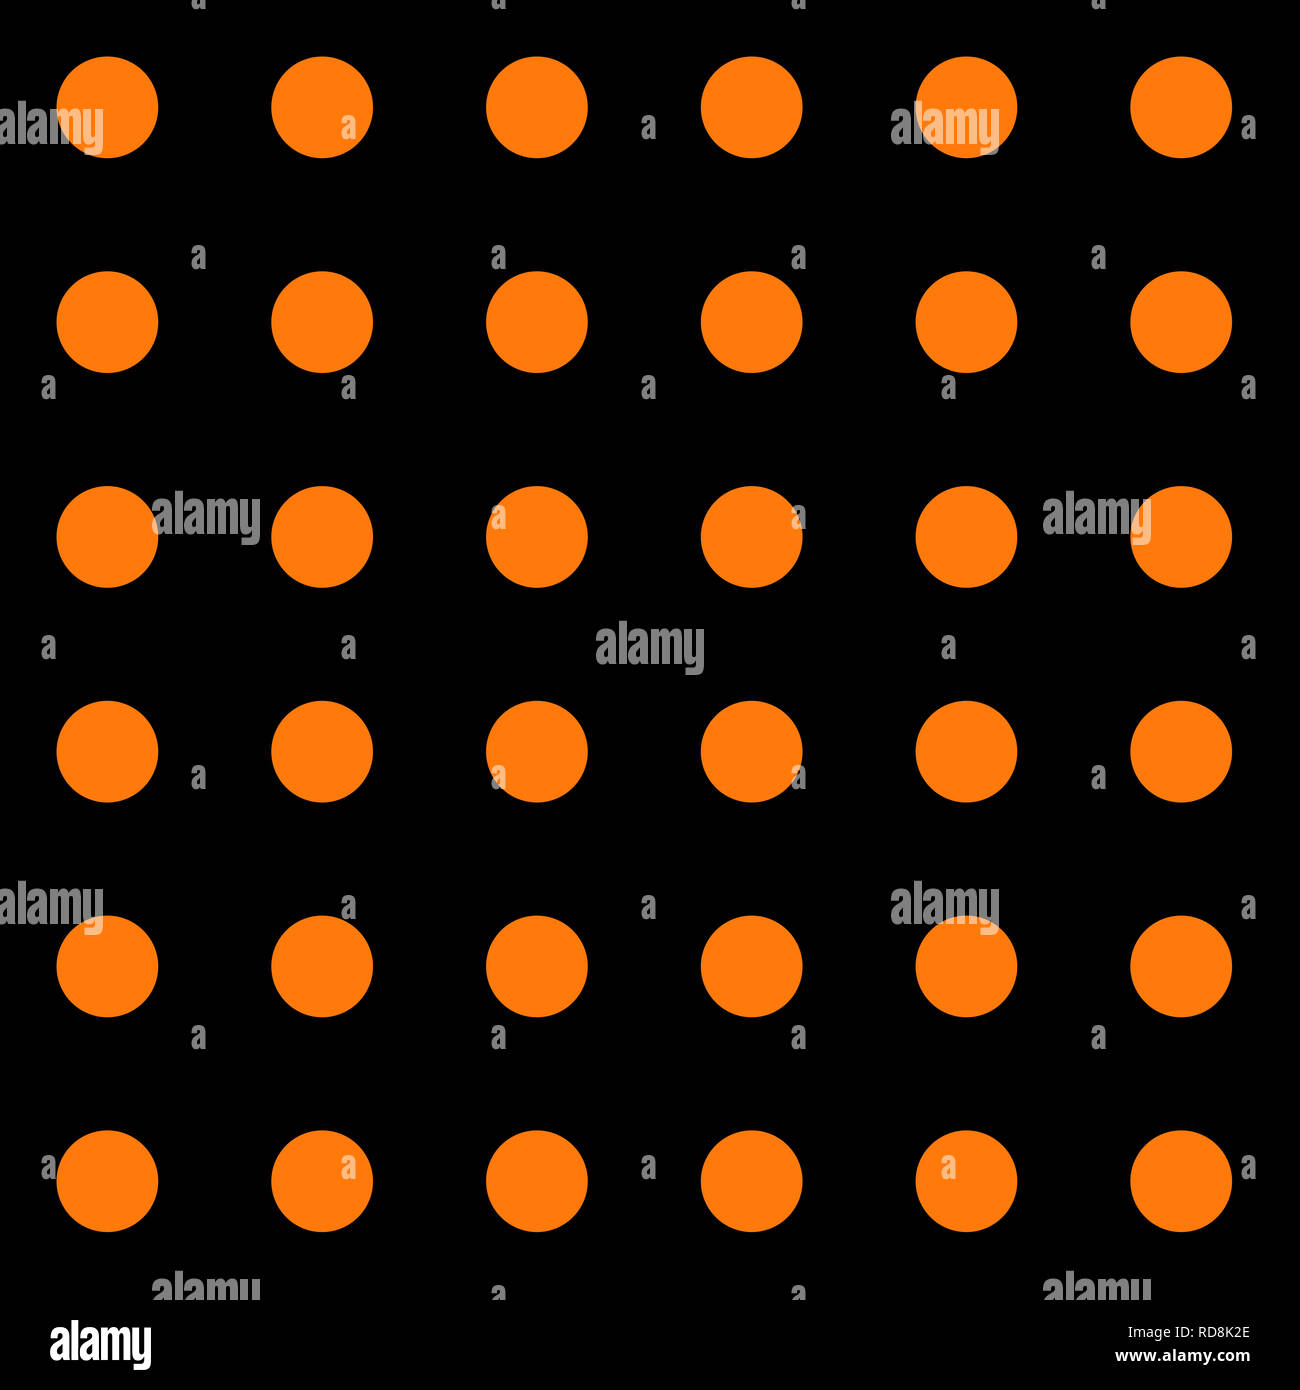 Seamless repeating pattern of big orange dots on a black background Stock Photo